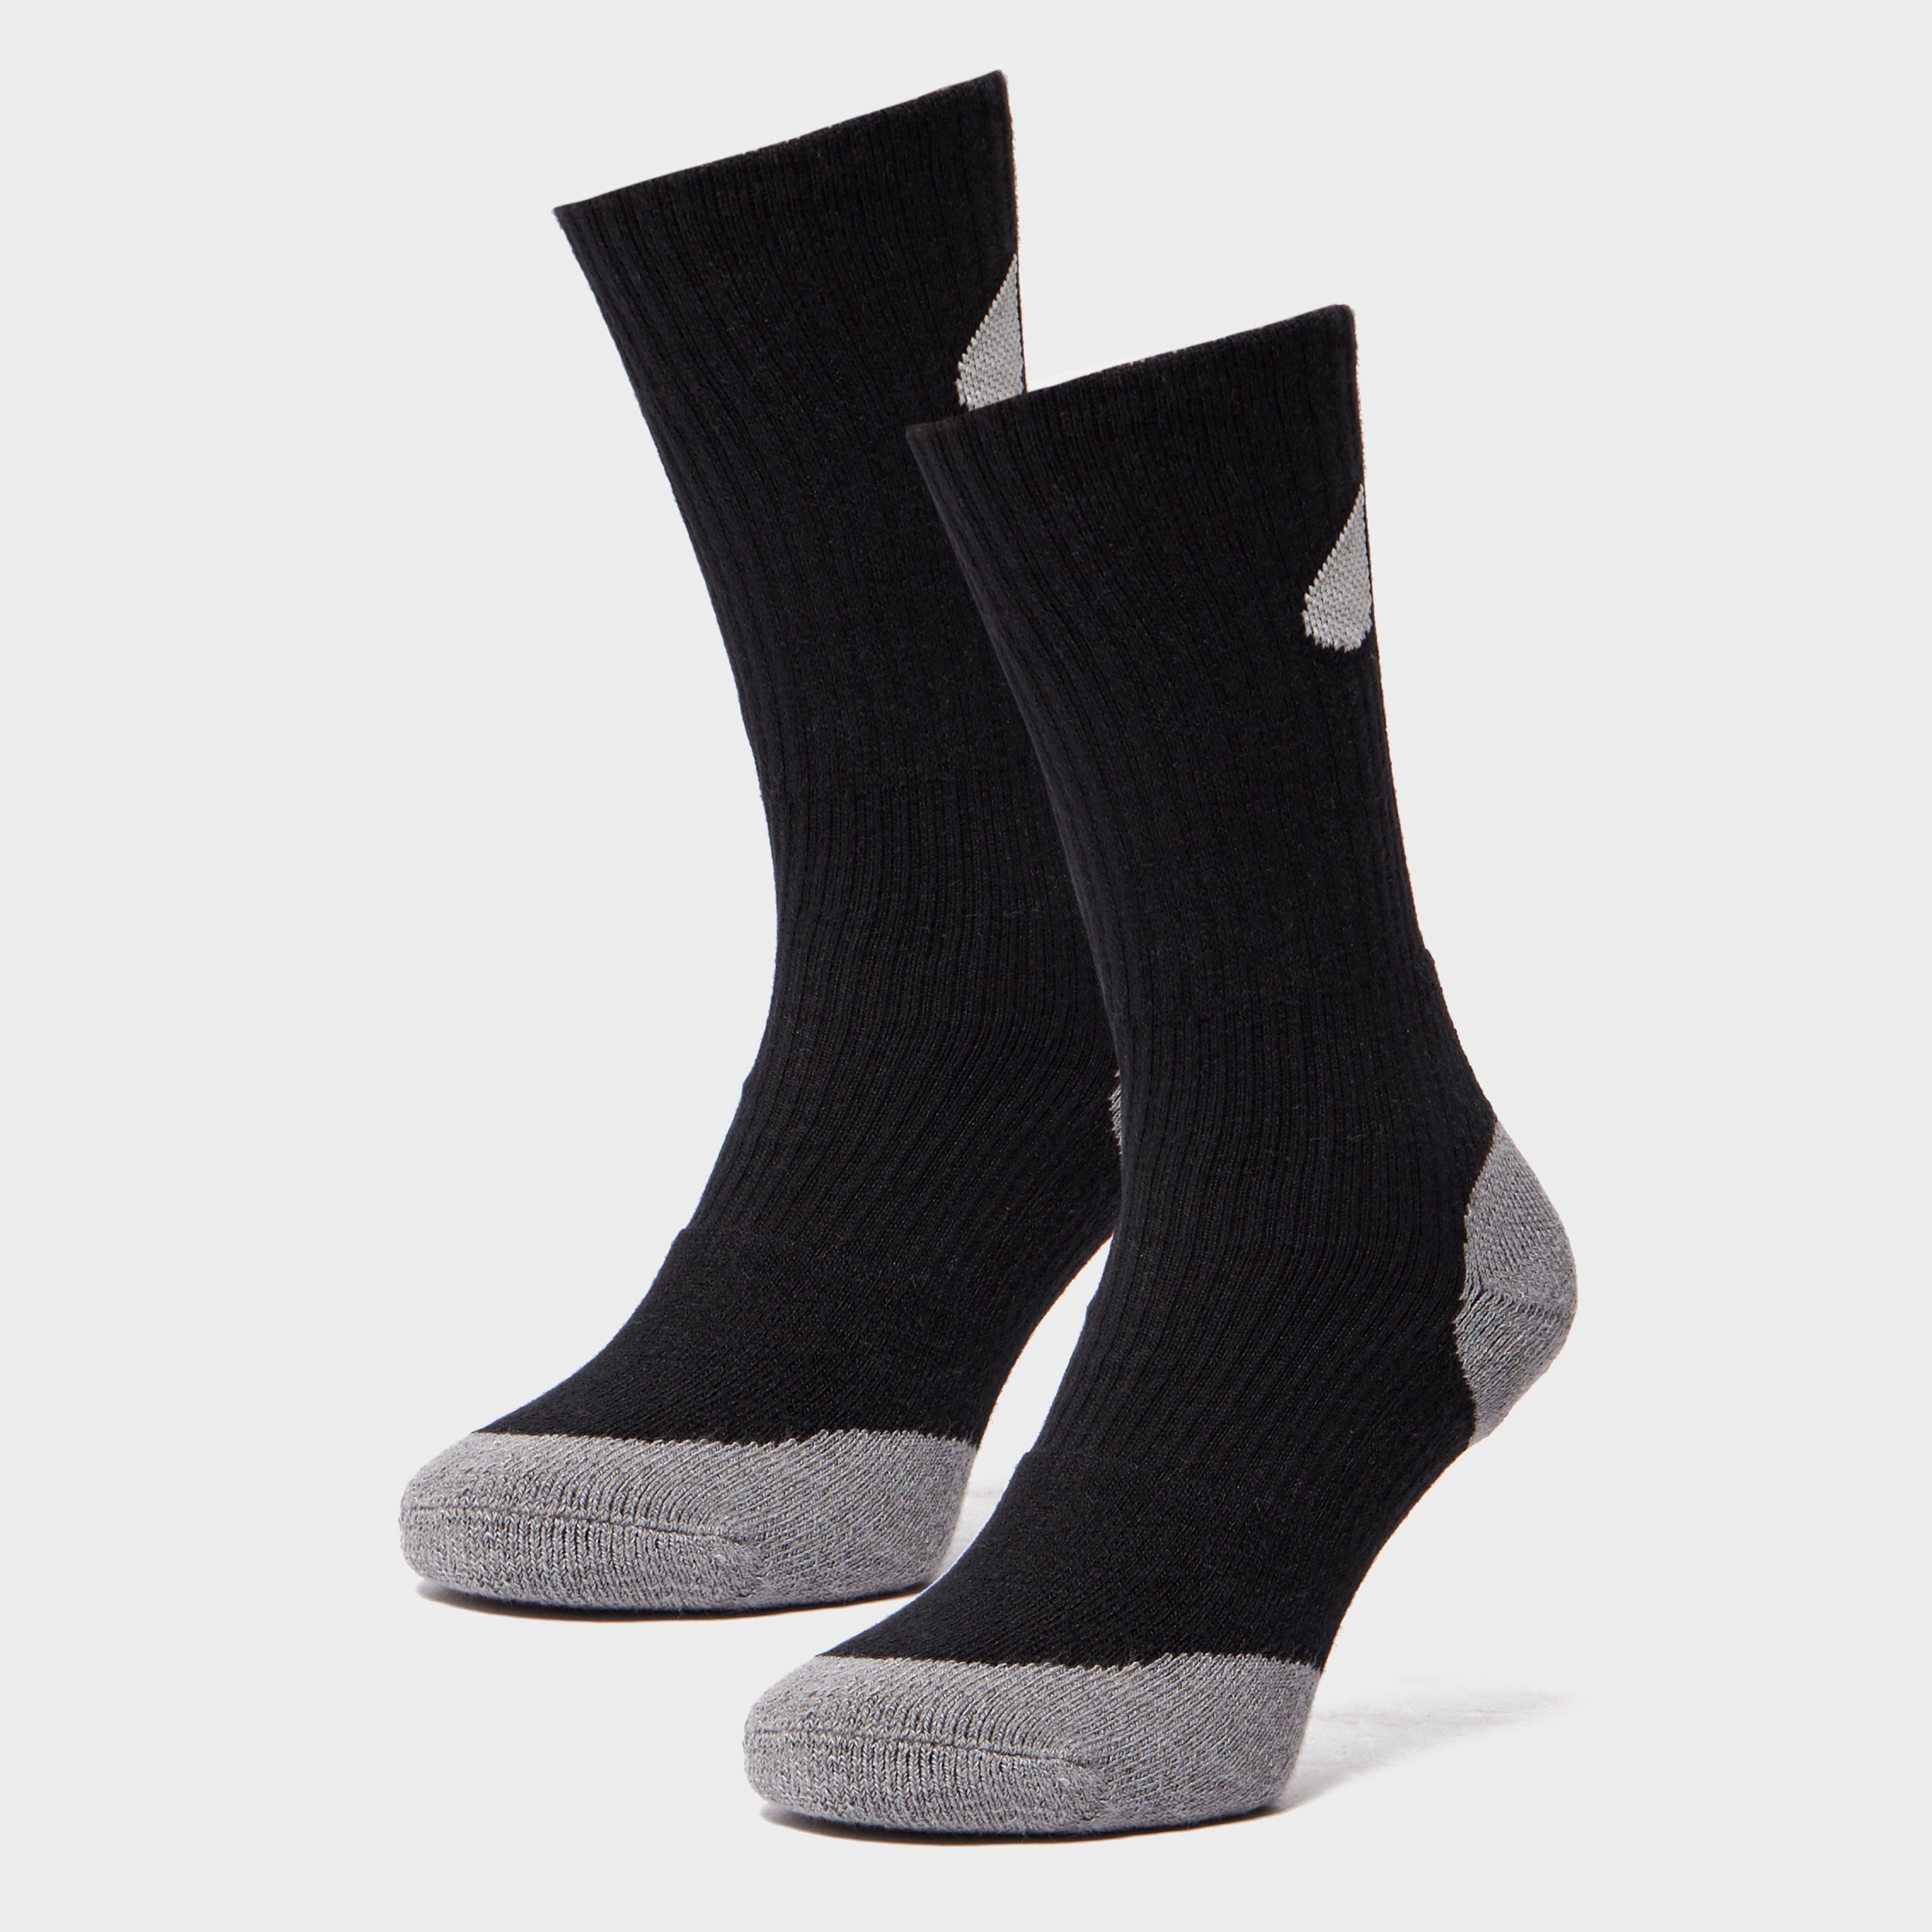 Peter Storm Double Layer Socks - 2 Pack  Black